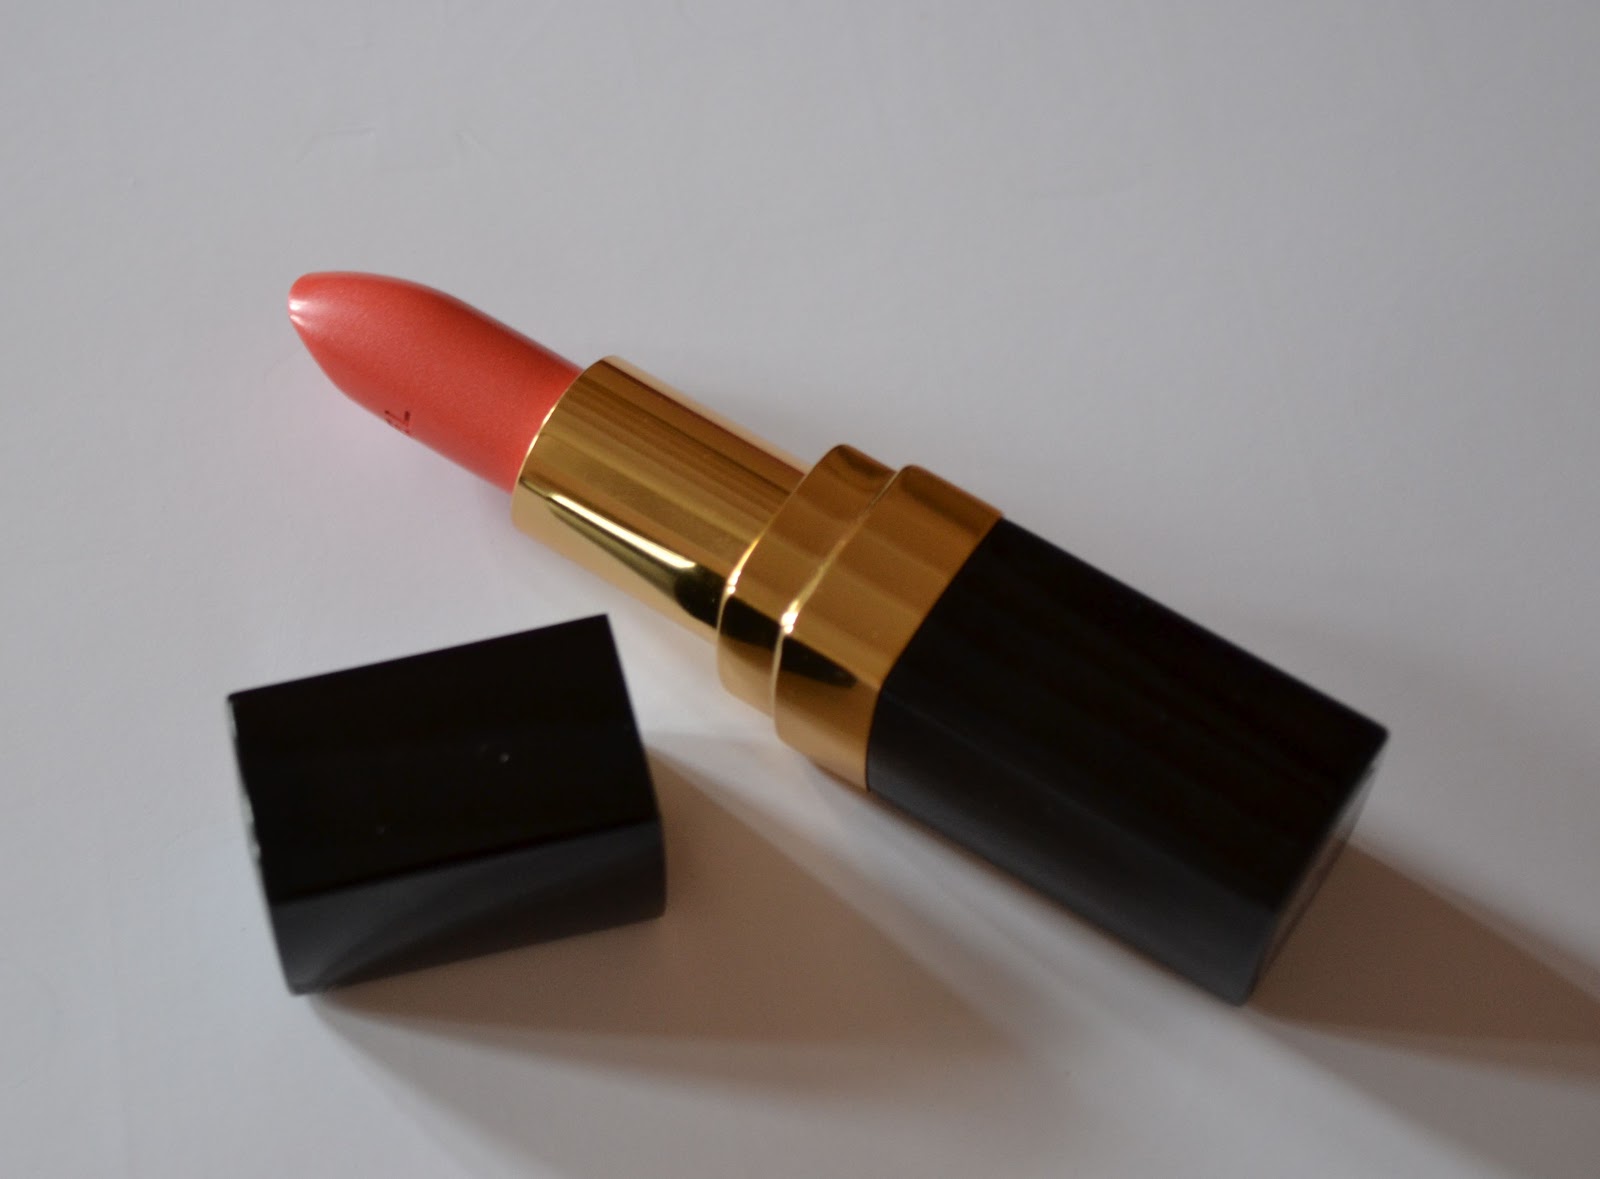 Chanel, Rouge Coco Flash Lipstick: Review and Swatches